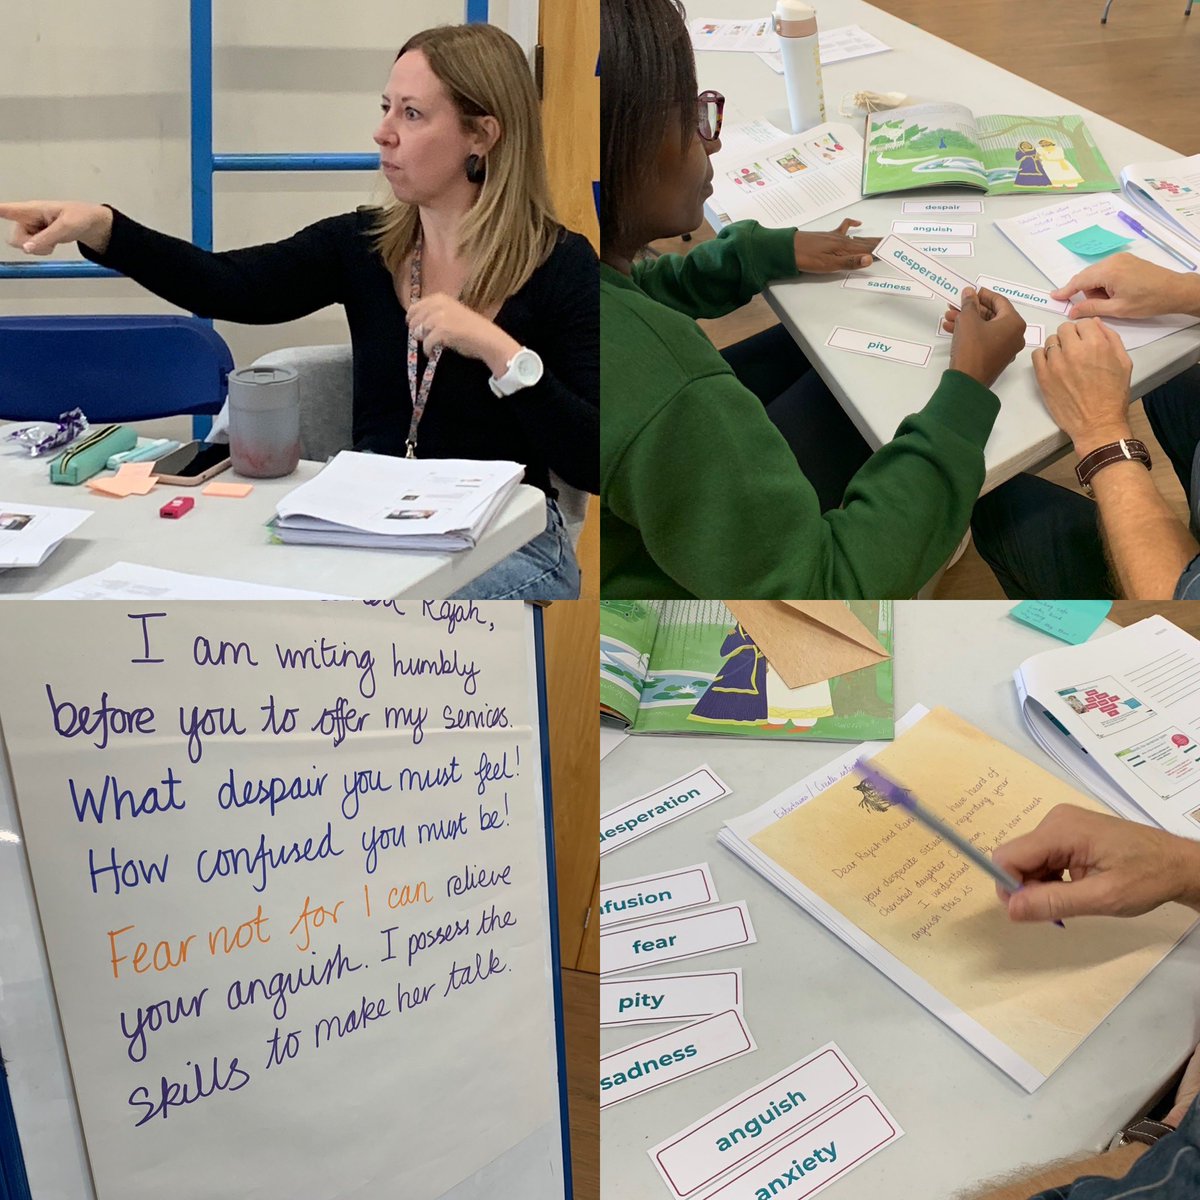 From the Discovery Point through to inference; vocabulary development then a writing opportunity with a distinct audience and purpose and instant publishing thrown in, we’ve thoroughly explored the #TeachThroughaText approach @GrangehurstCov this morning. @theliteracytree